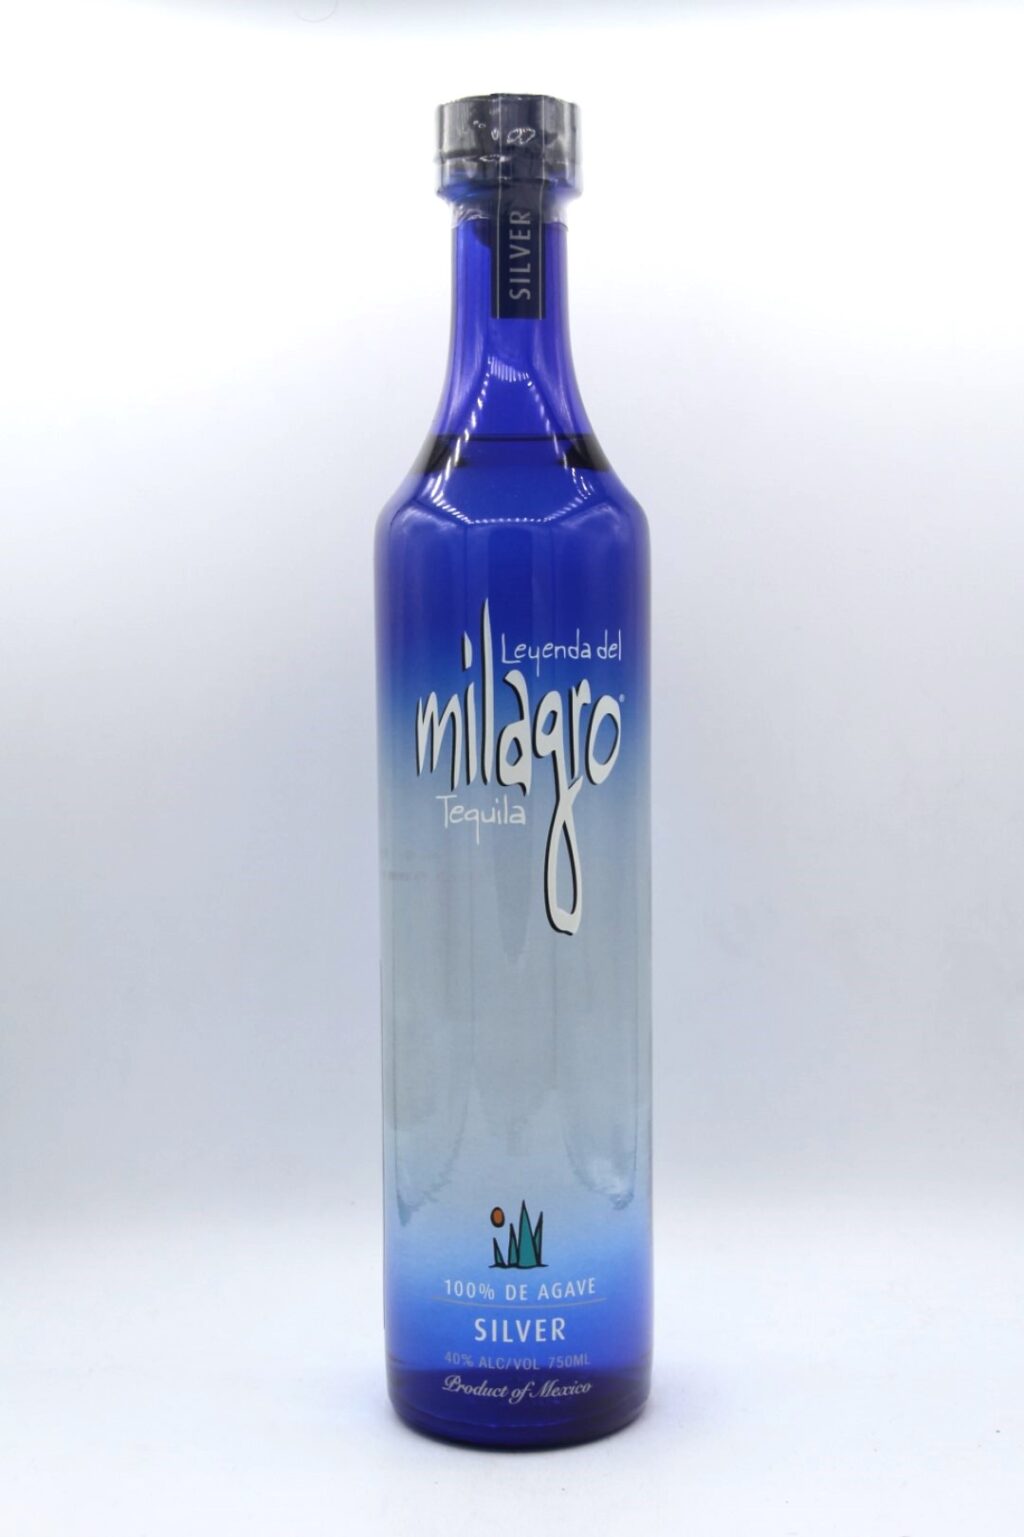 Milagro Silver Tequila